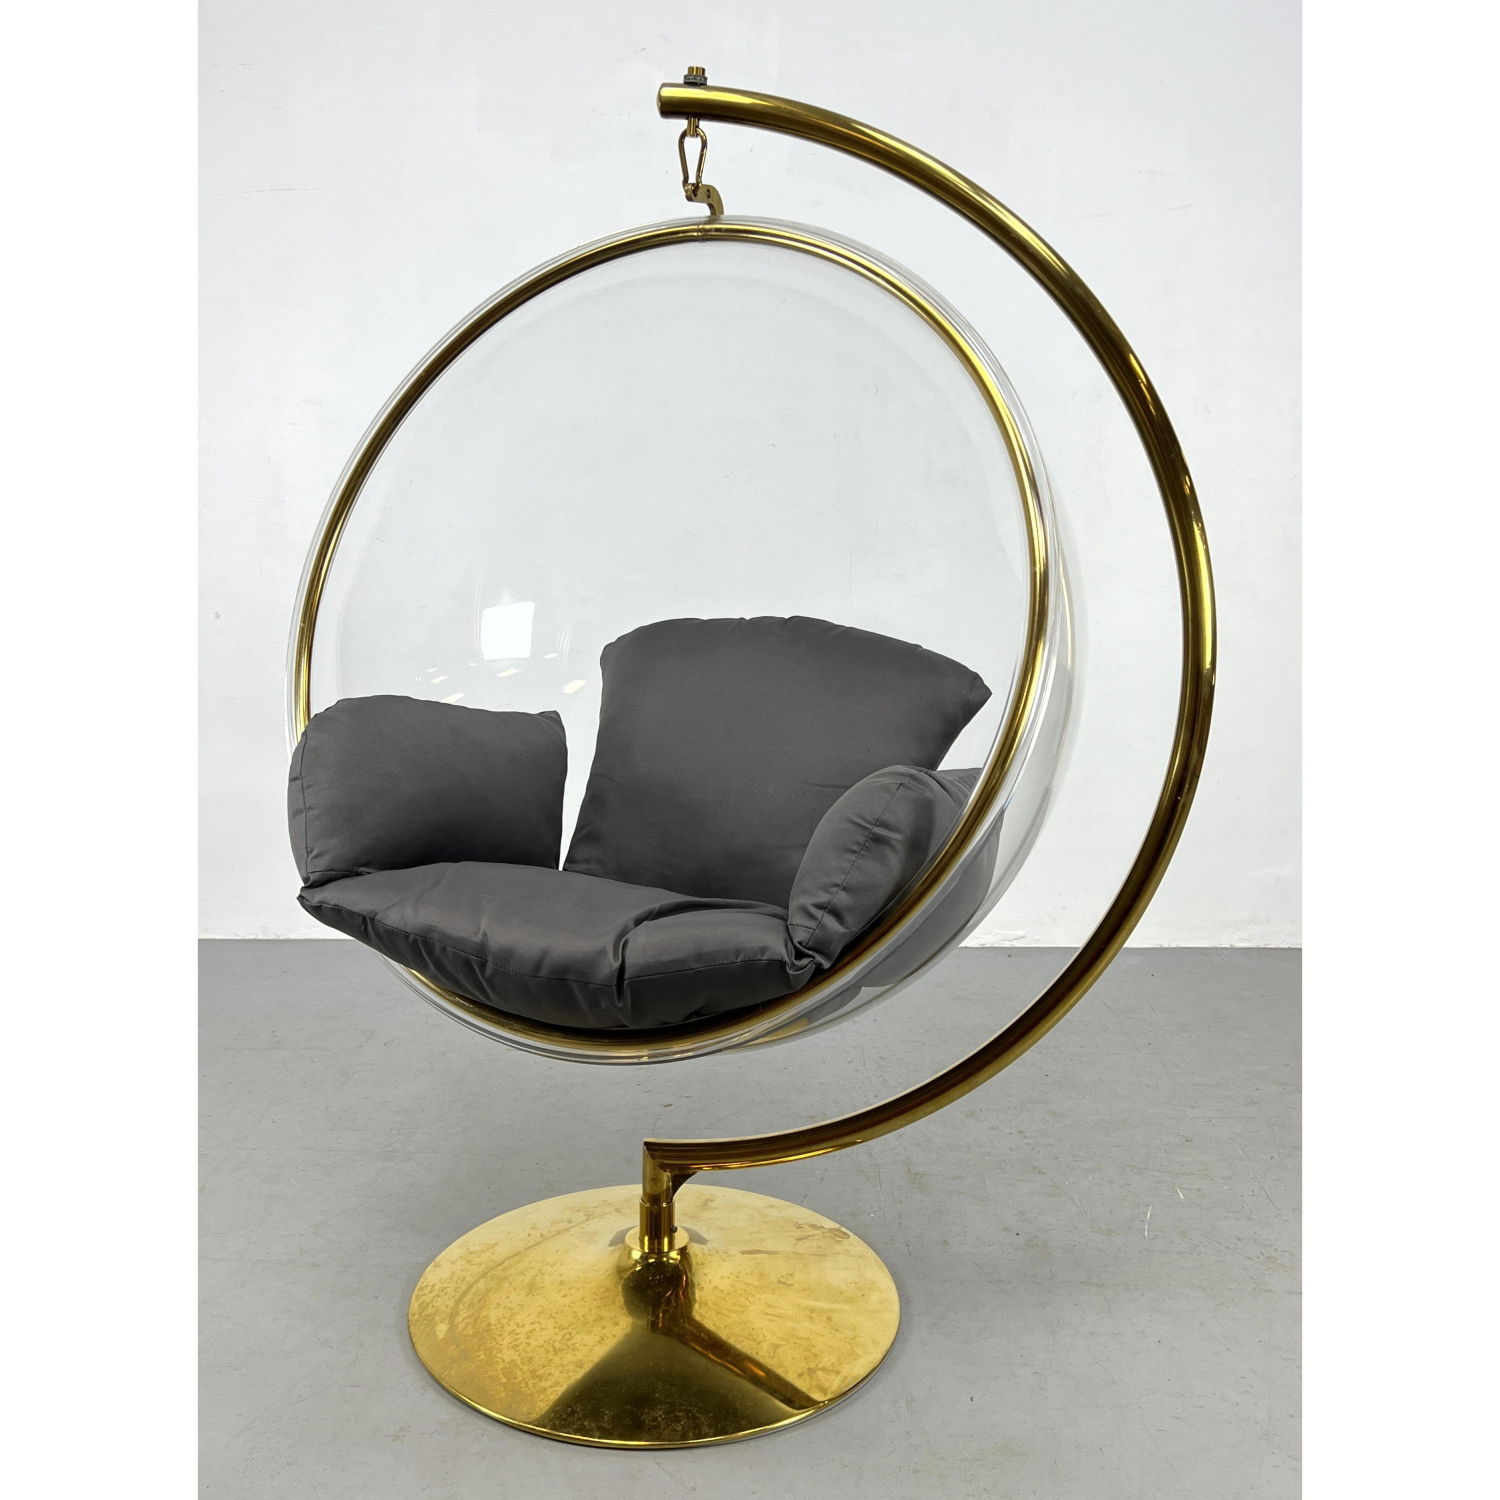 Lucite Bubble Hanging Chair. Brass